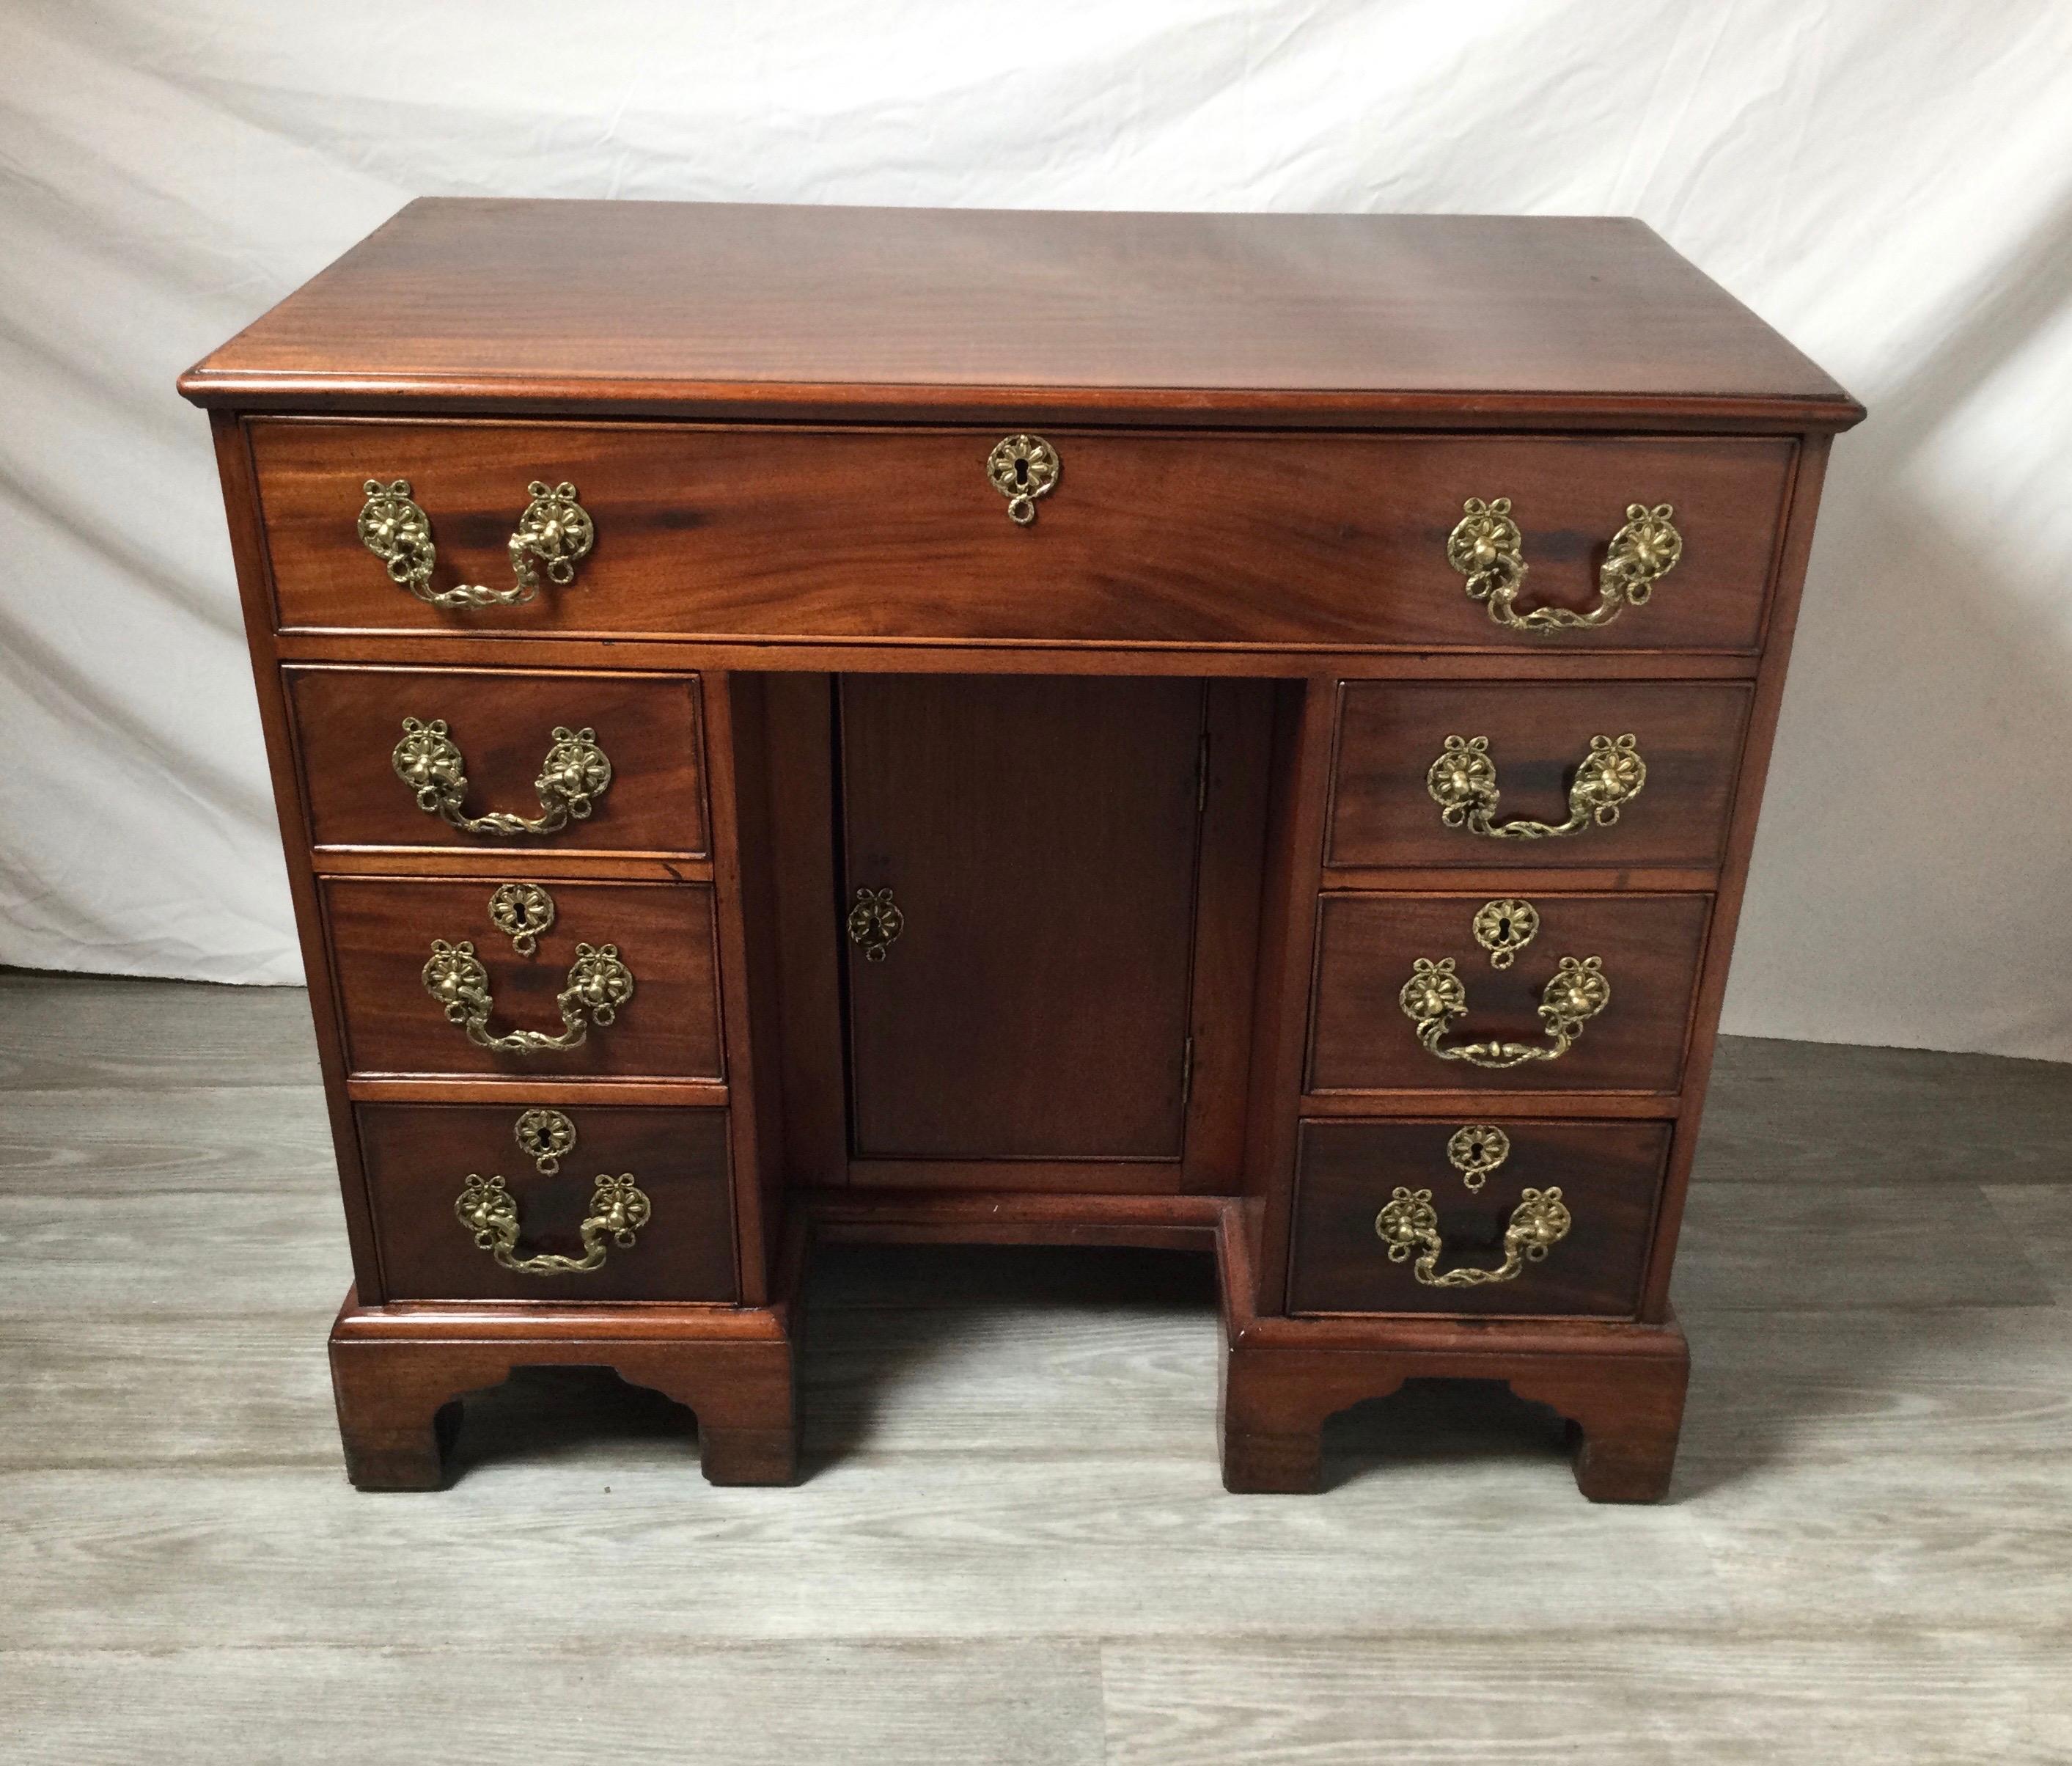 An English mahogany desk, circa 1780. A rectangular top with one long drawer with three smaller drawers on each side. There is a center door storage compartment in the cent. The desk with brass hardware and key, all resting on four bracket feet. An